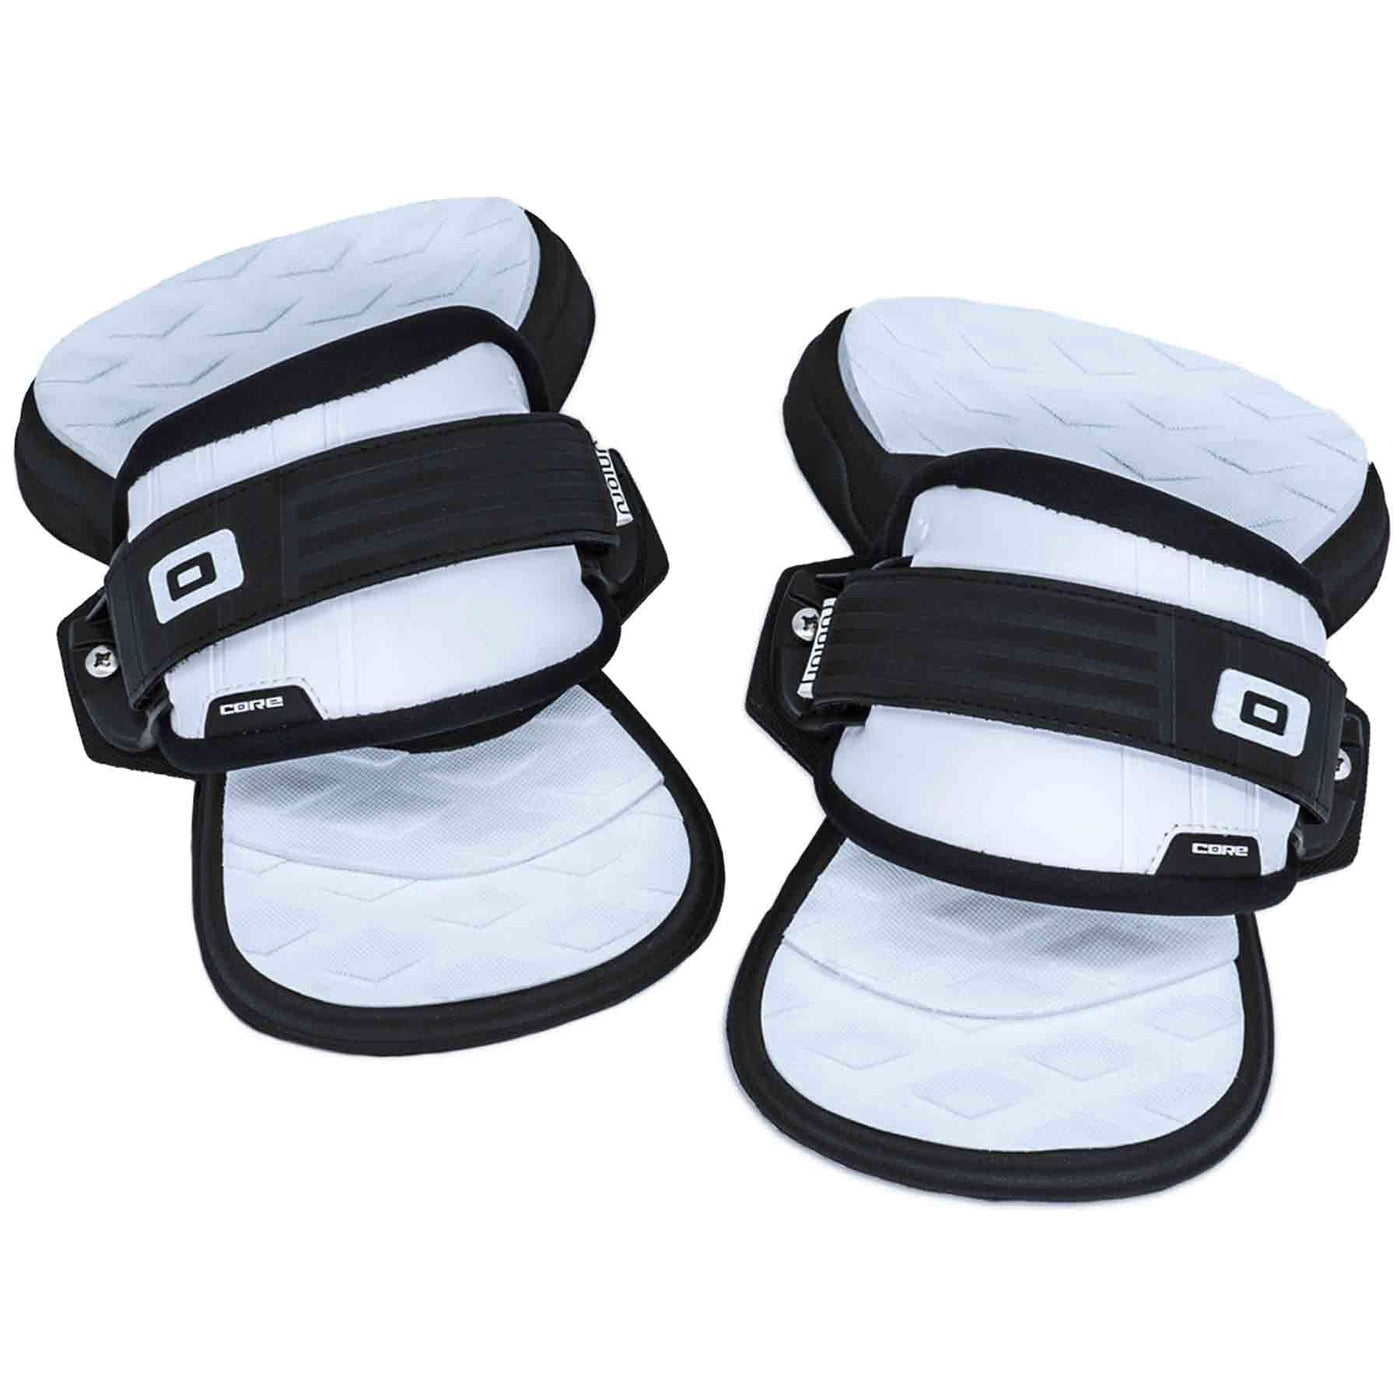 Core Union Comfort 2 Pads and Straps CORE